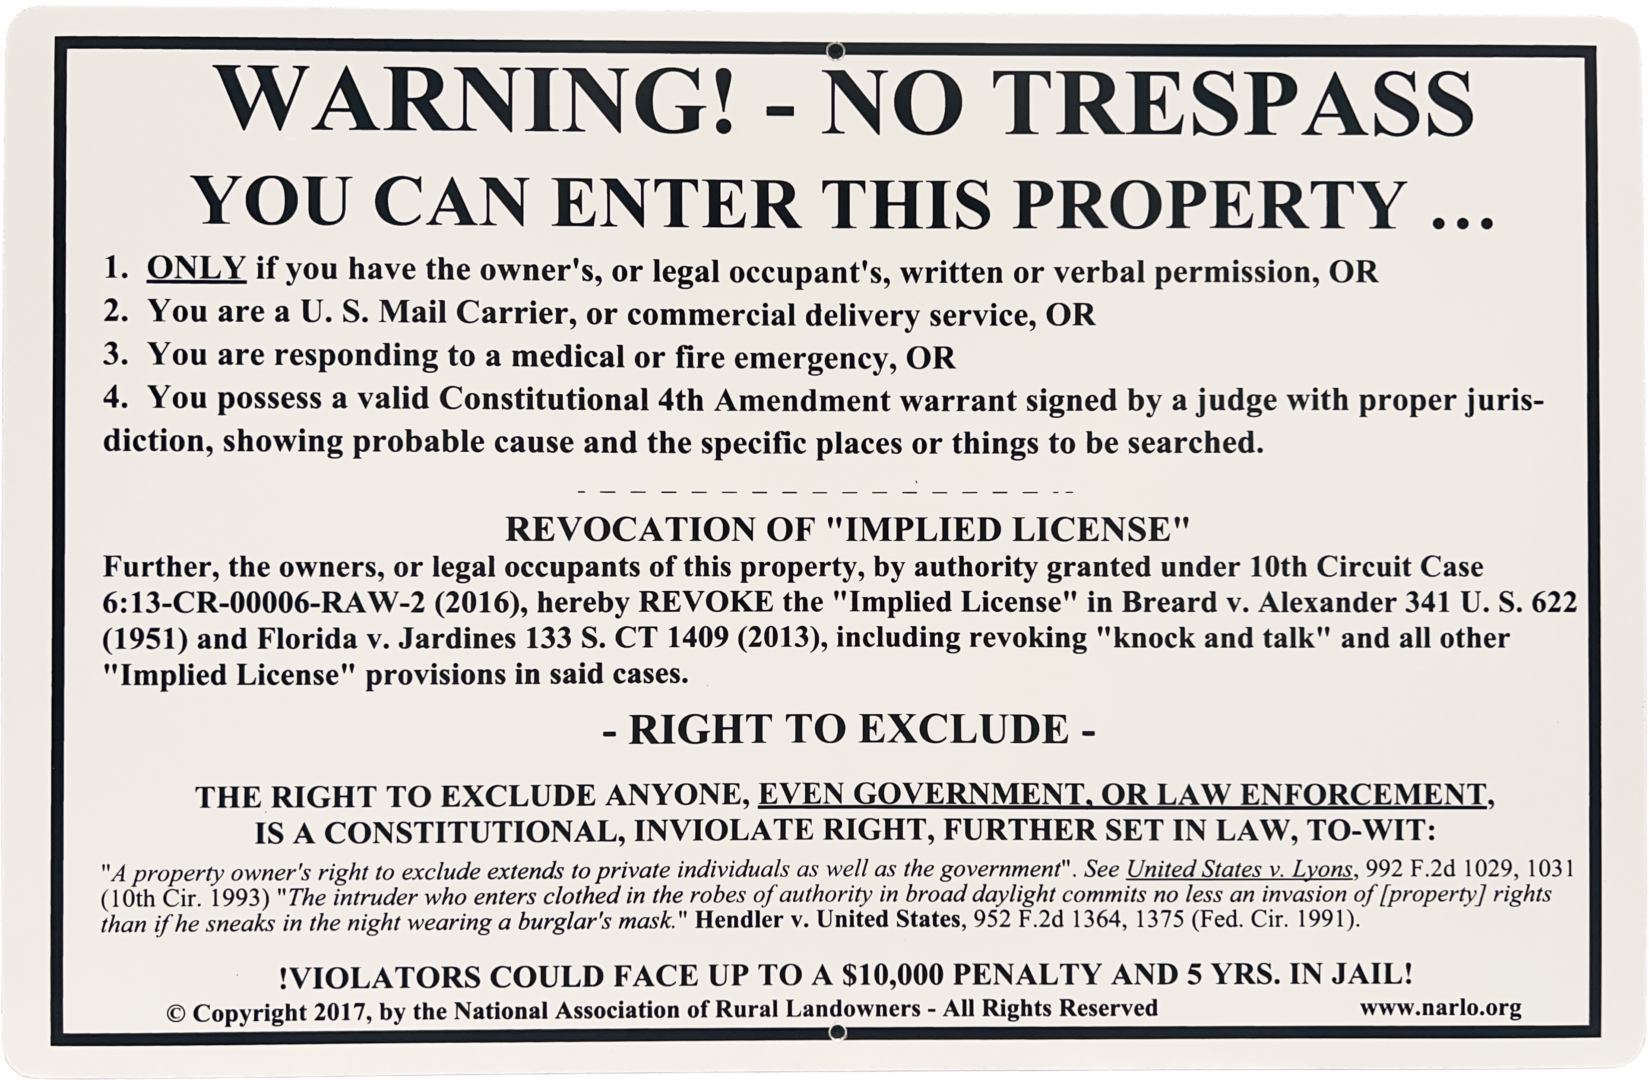 A notice warning of no trespassing is posted on the side of a building.